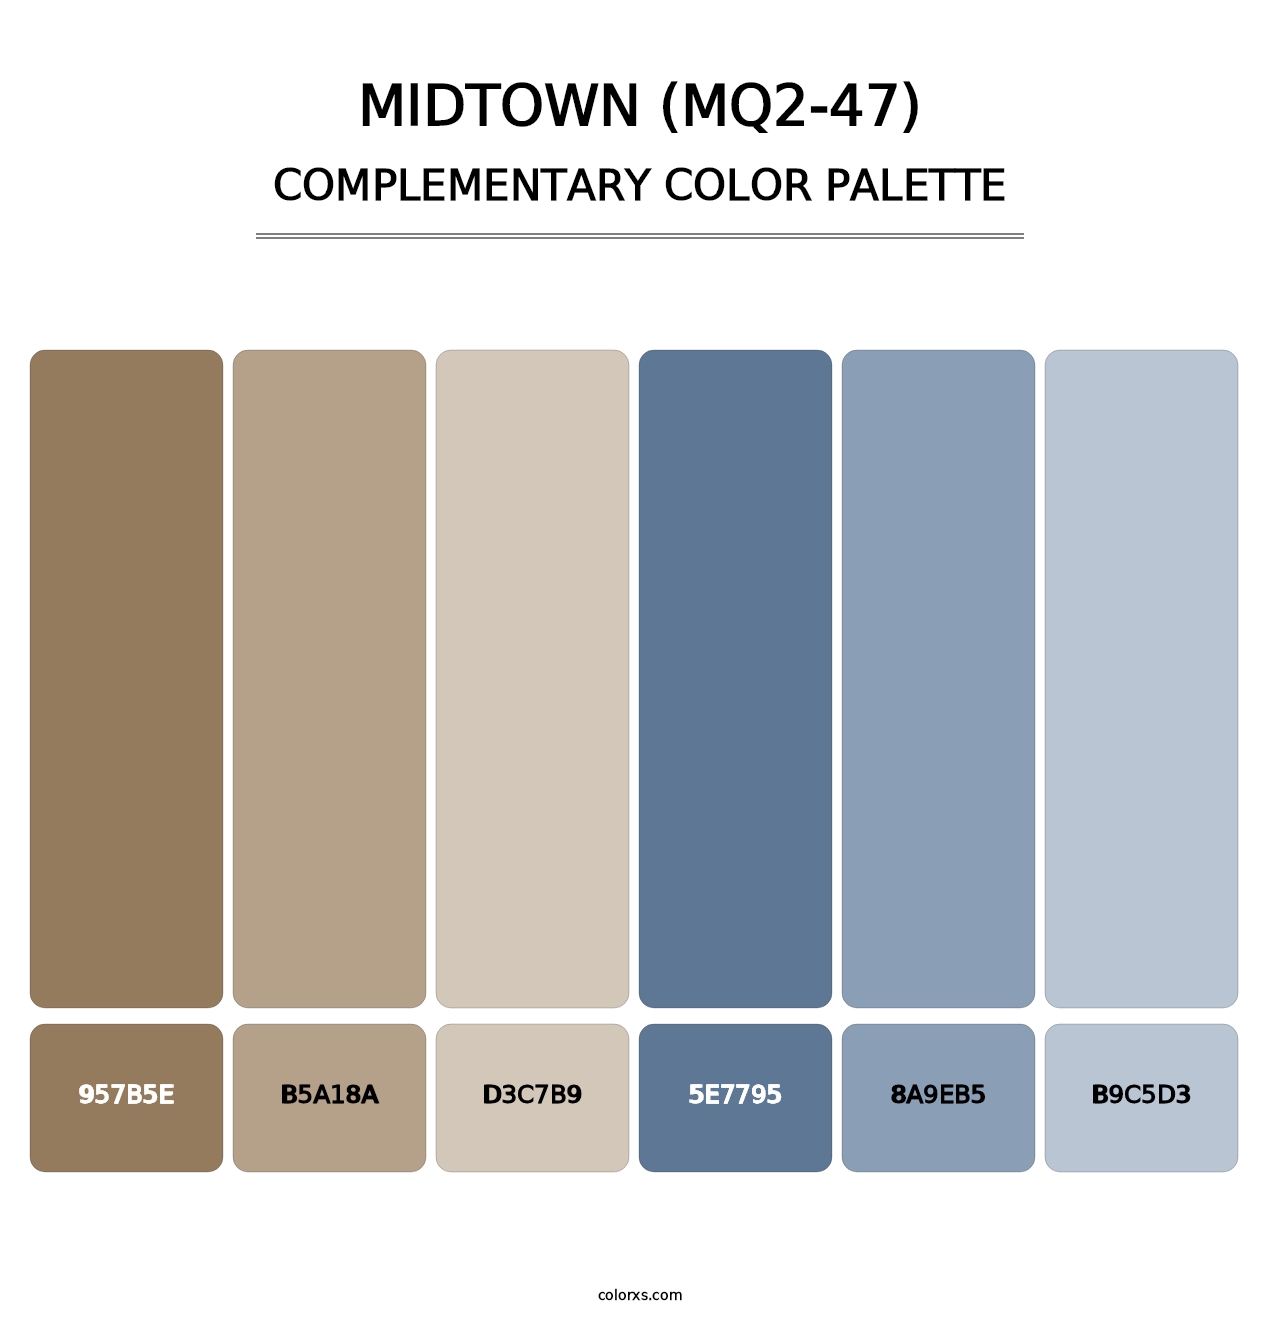 Midtown (MQ2-47) - Complementary Color Palette